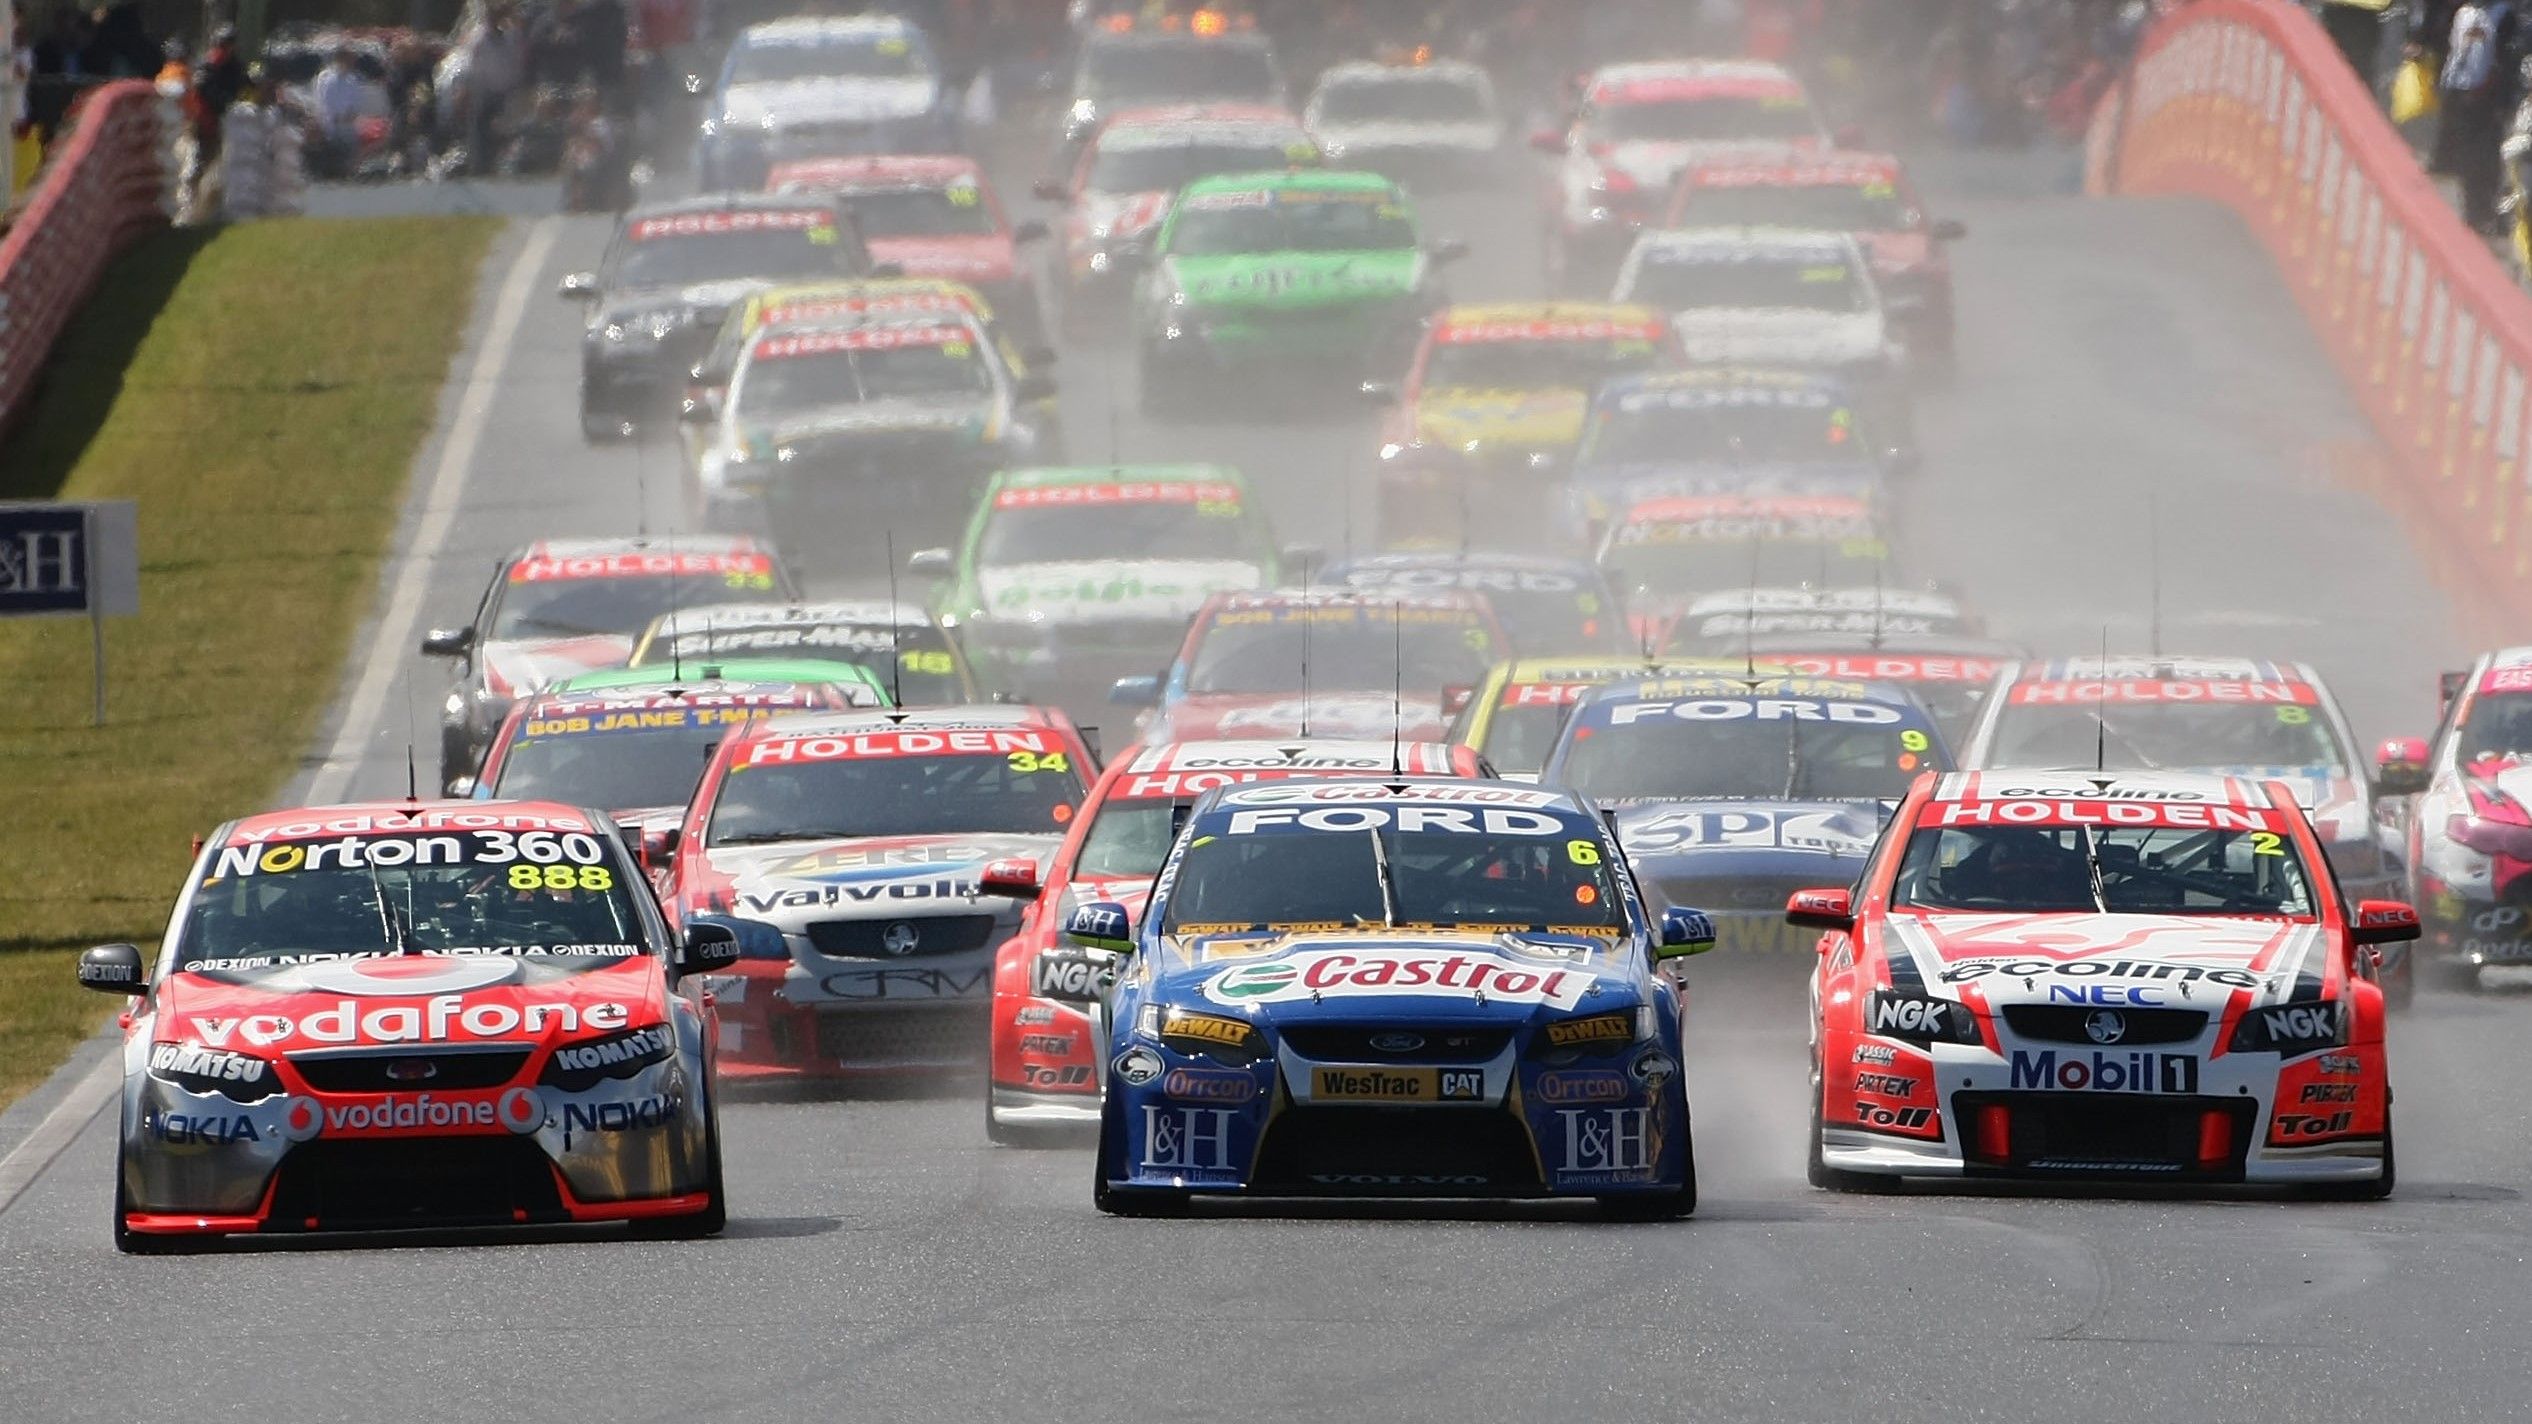 The start of the 2009 Bathurst 1000, which was won by Garth Tander and Will Davison.